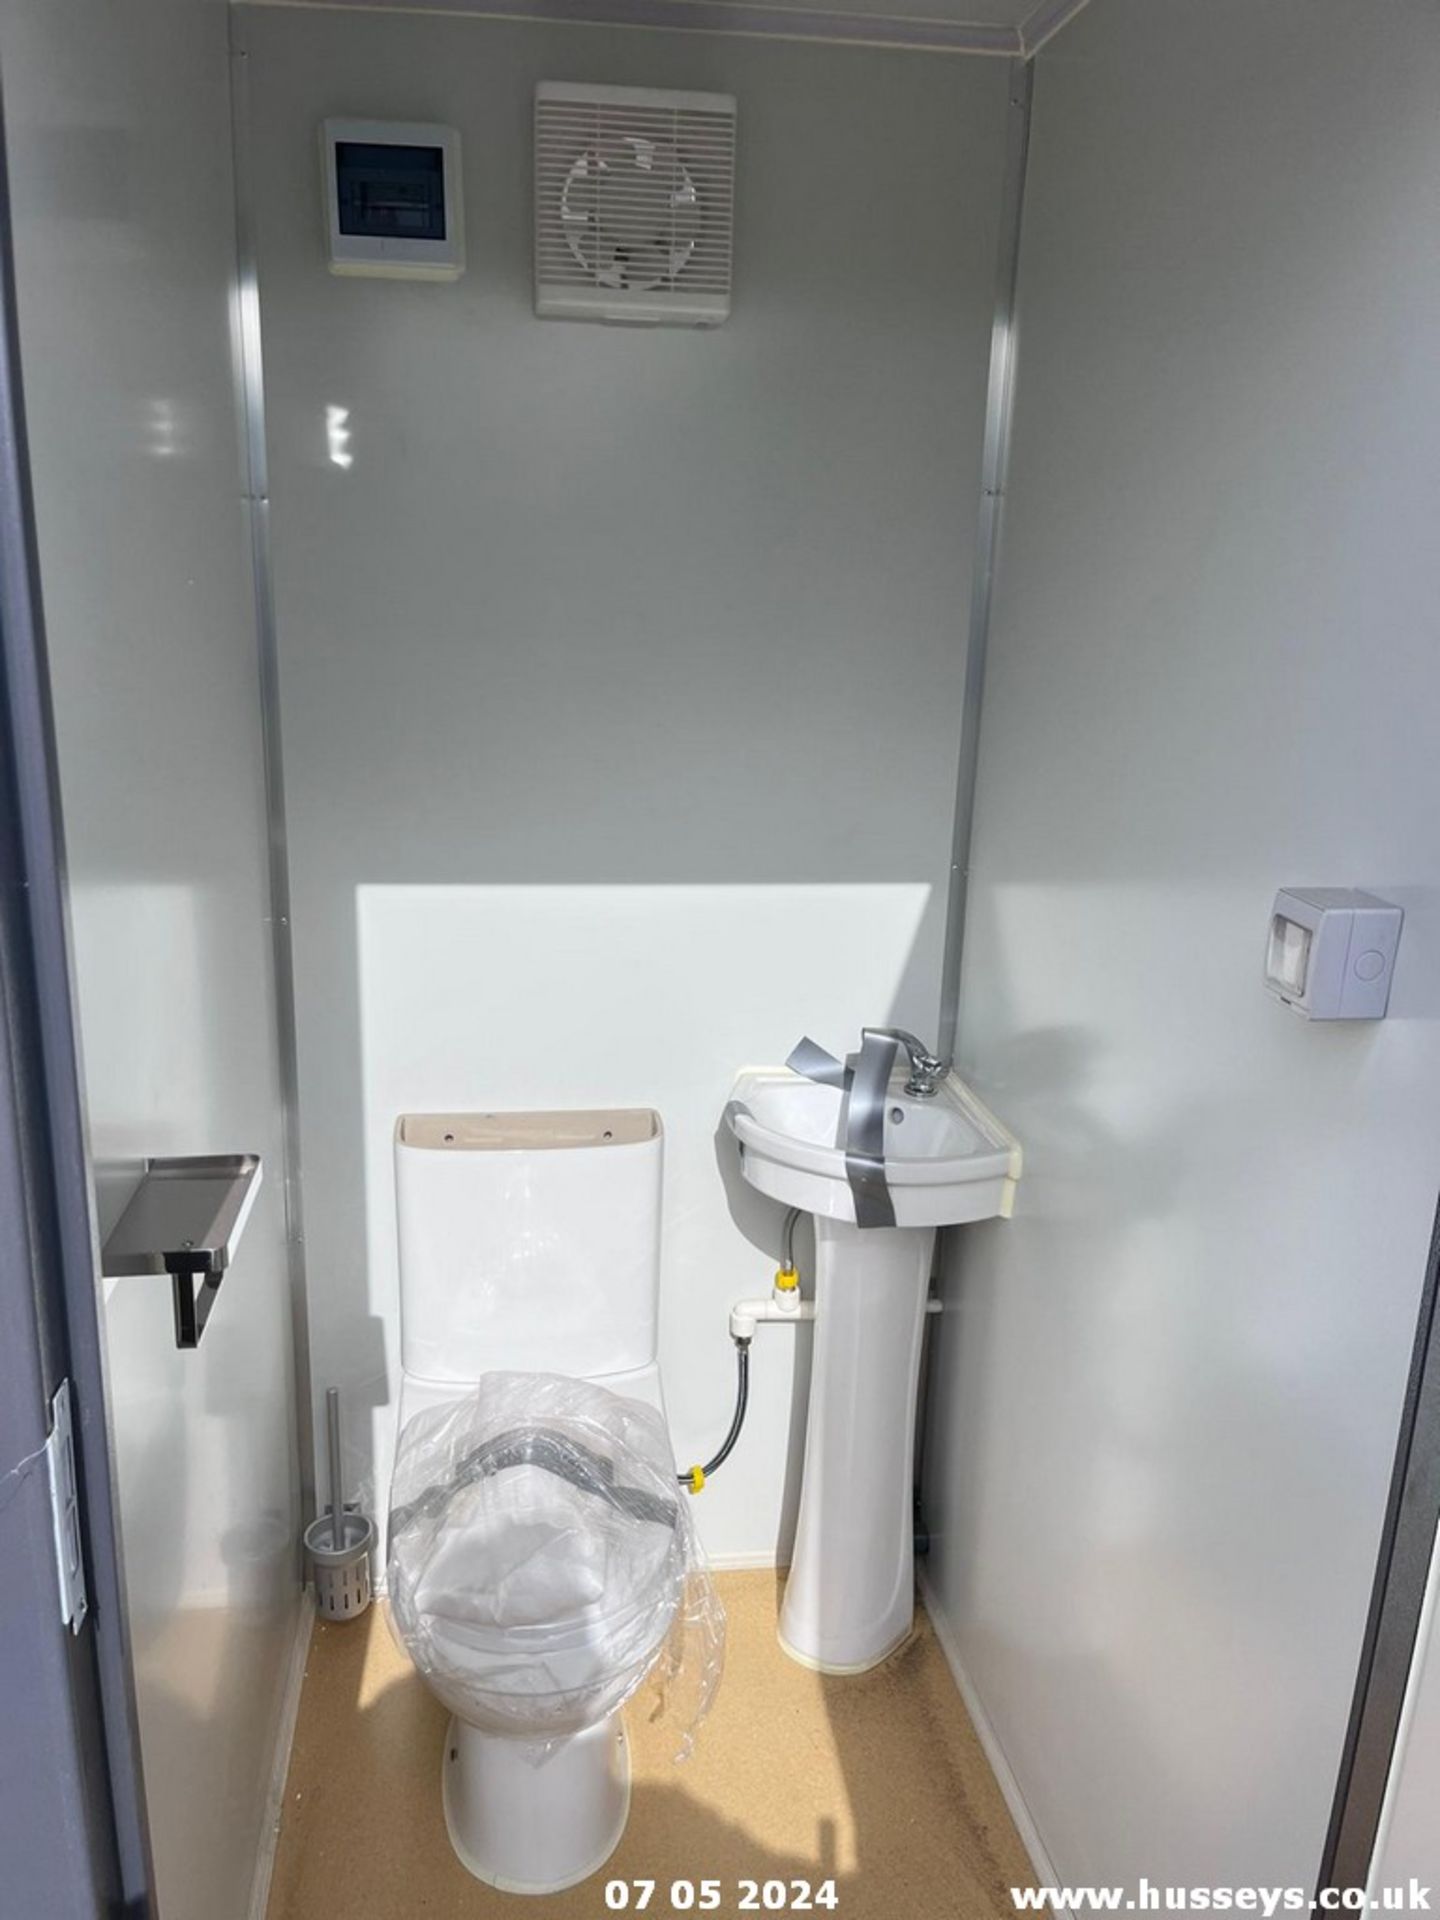 2 PERSON TOILET C.W 2 SINKS WCS LIGHTS & EXTRACTORS FORK POCKETS & LIFTING EYES C.W KEYS - Image 8 of 10